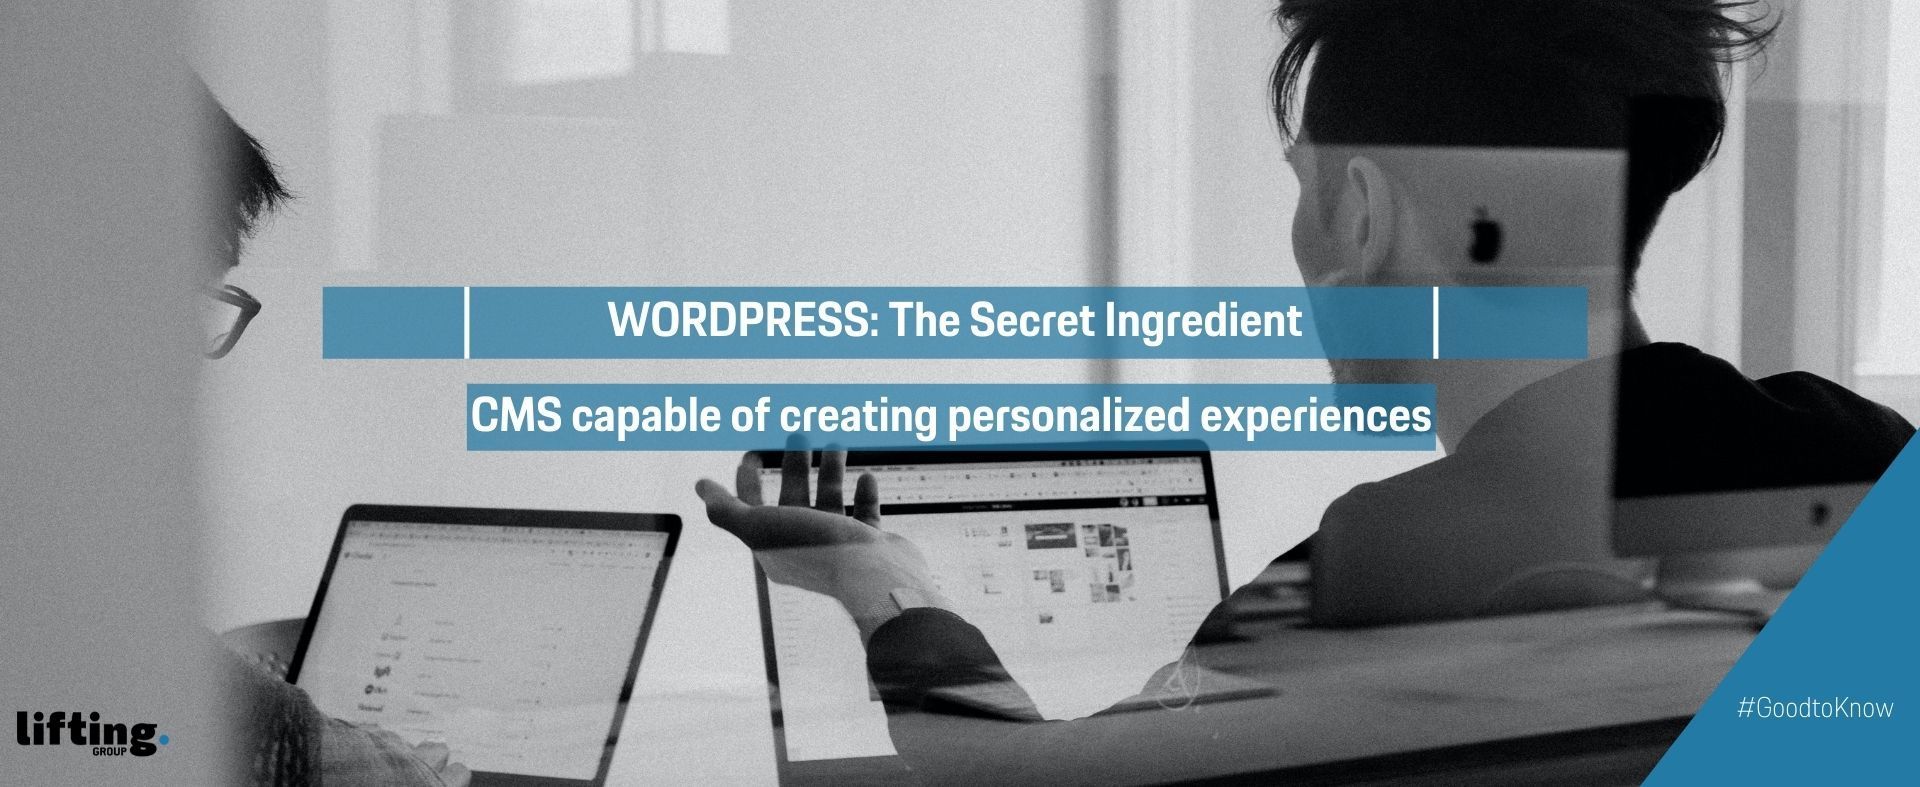 WordPress: A powerful CMS capable of creating personalized experiences